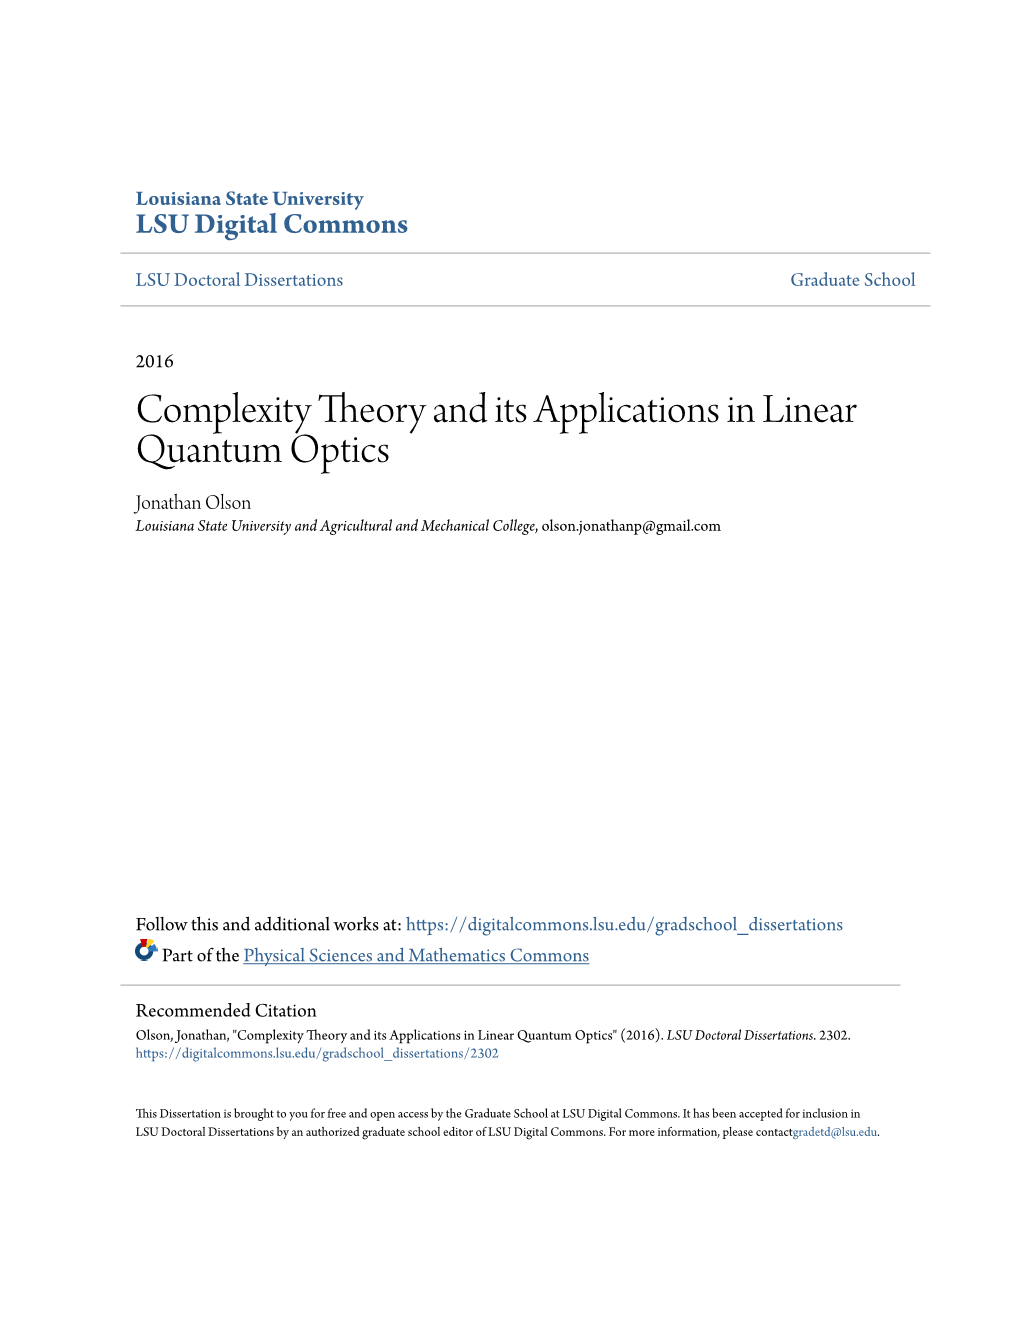 Complexity Theory and Its Applications in Linear Quantum